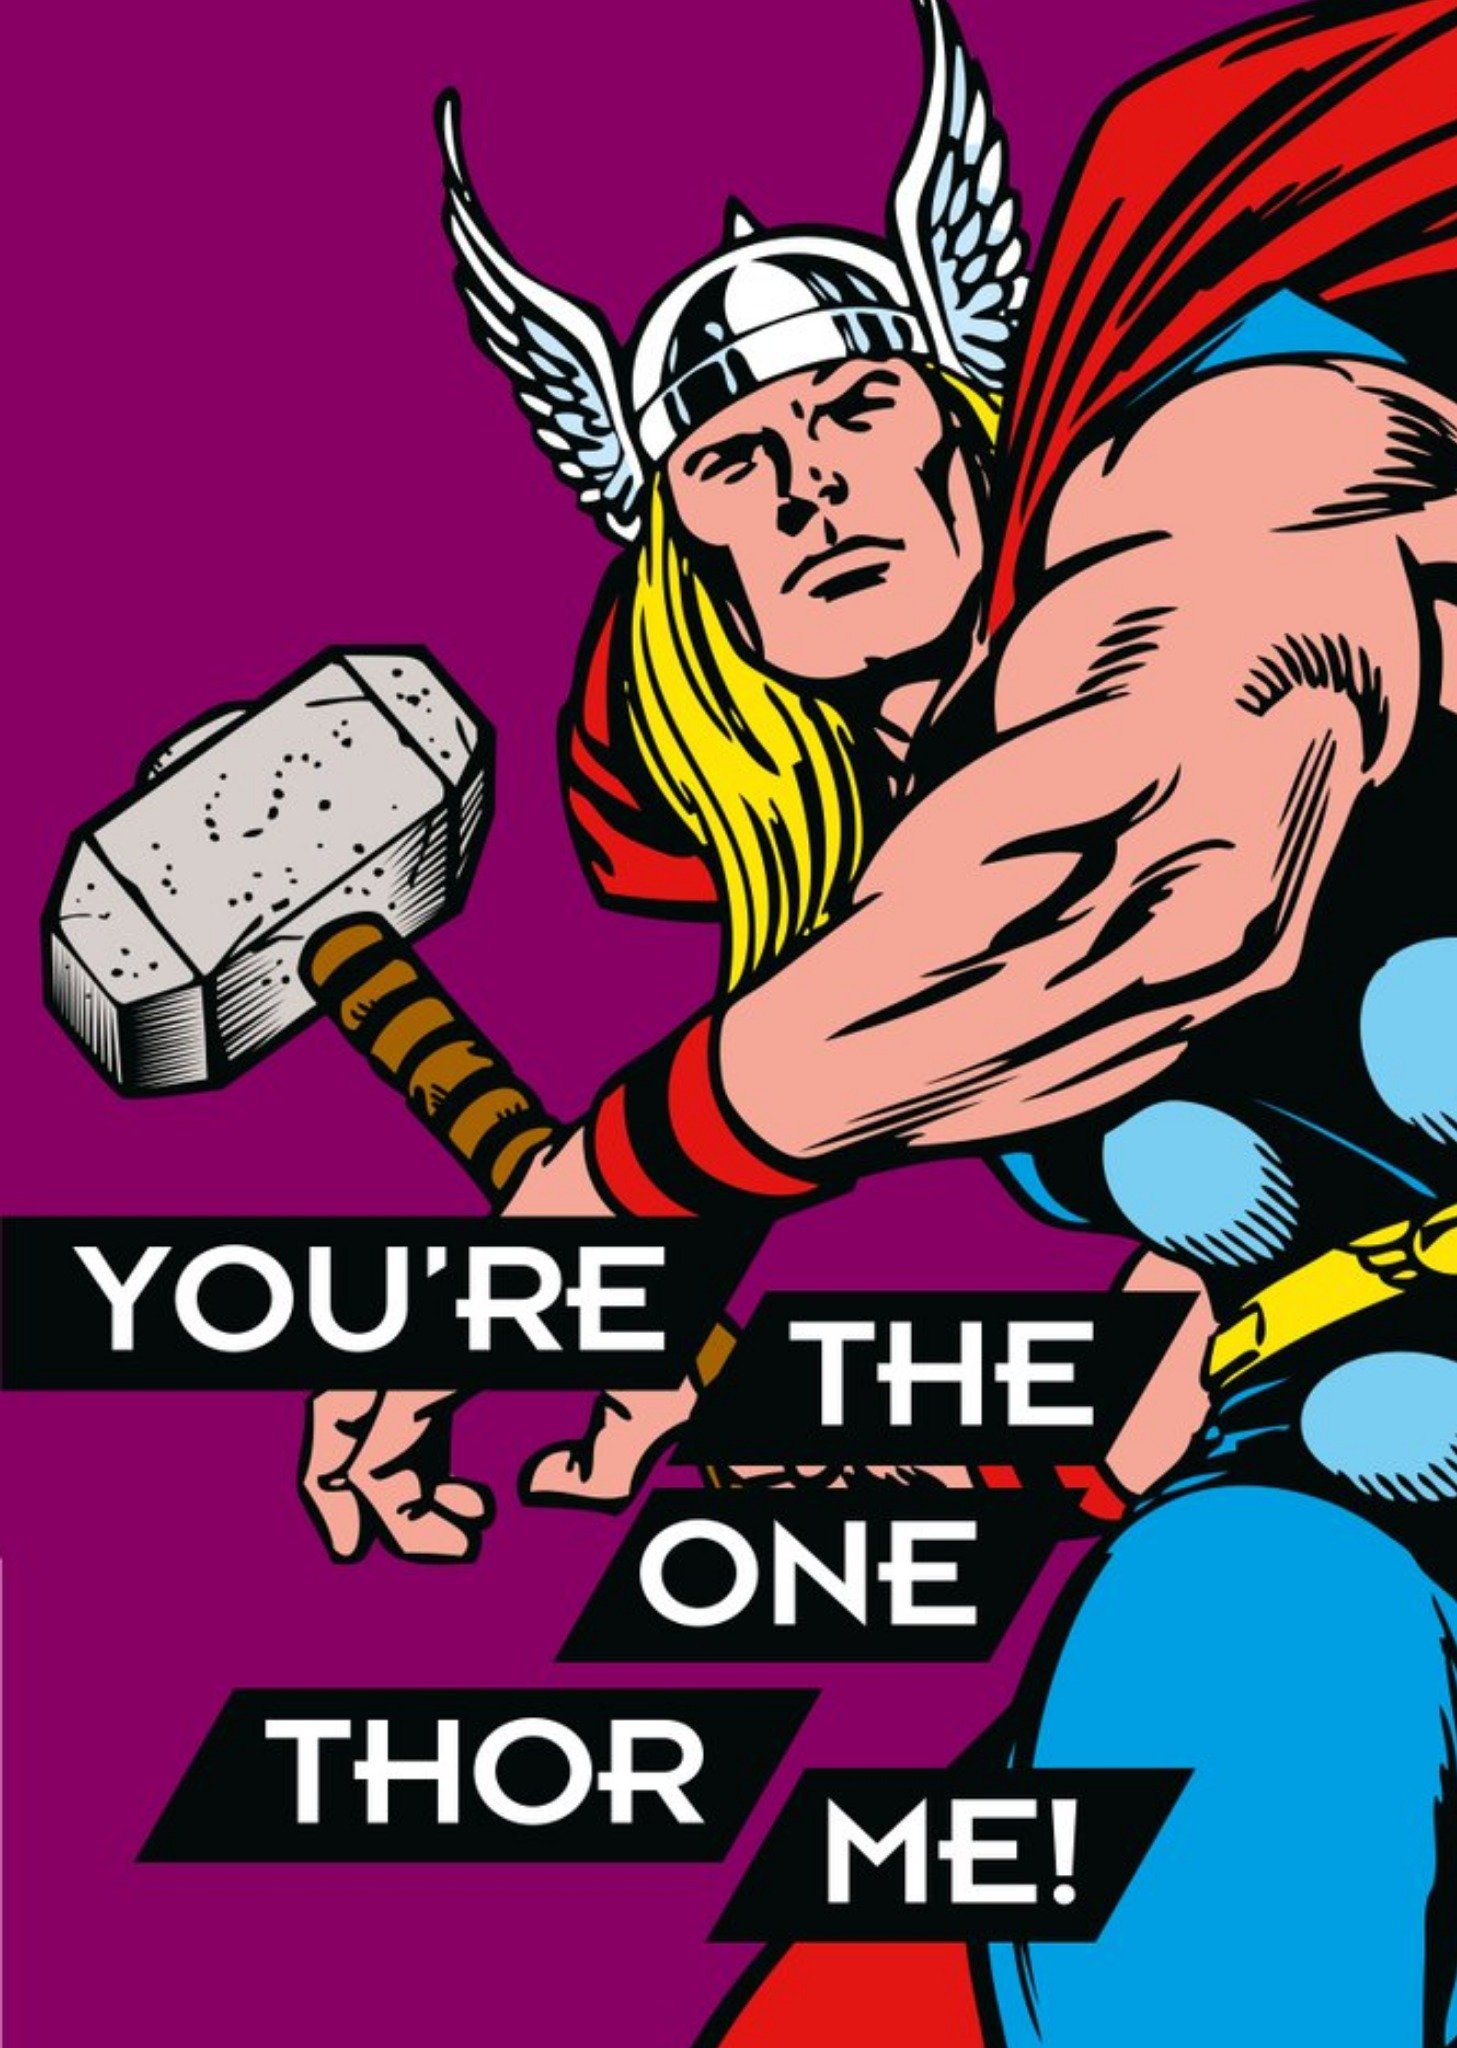 You're The One Thor Me Funny Pun Card From Marvel Avengers Ecard